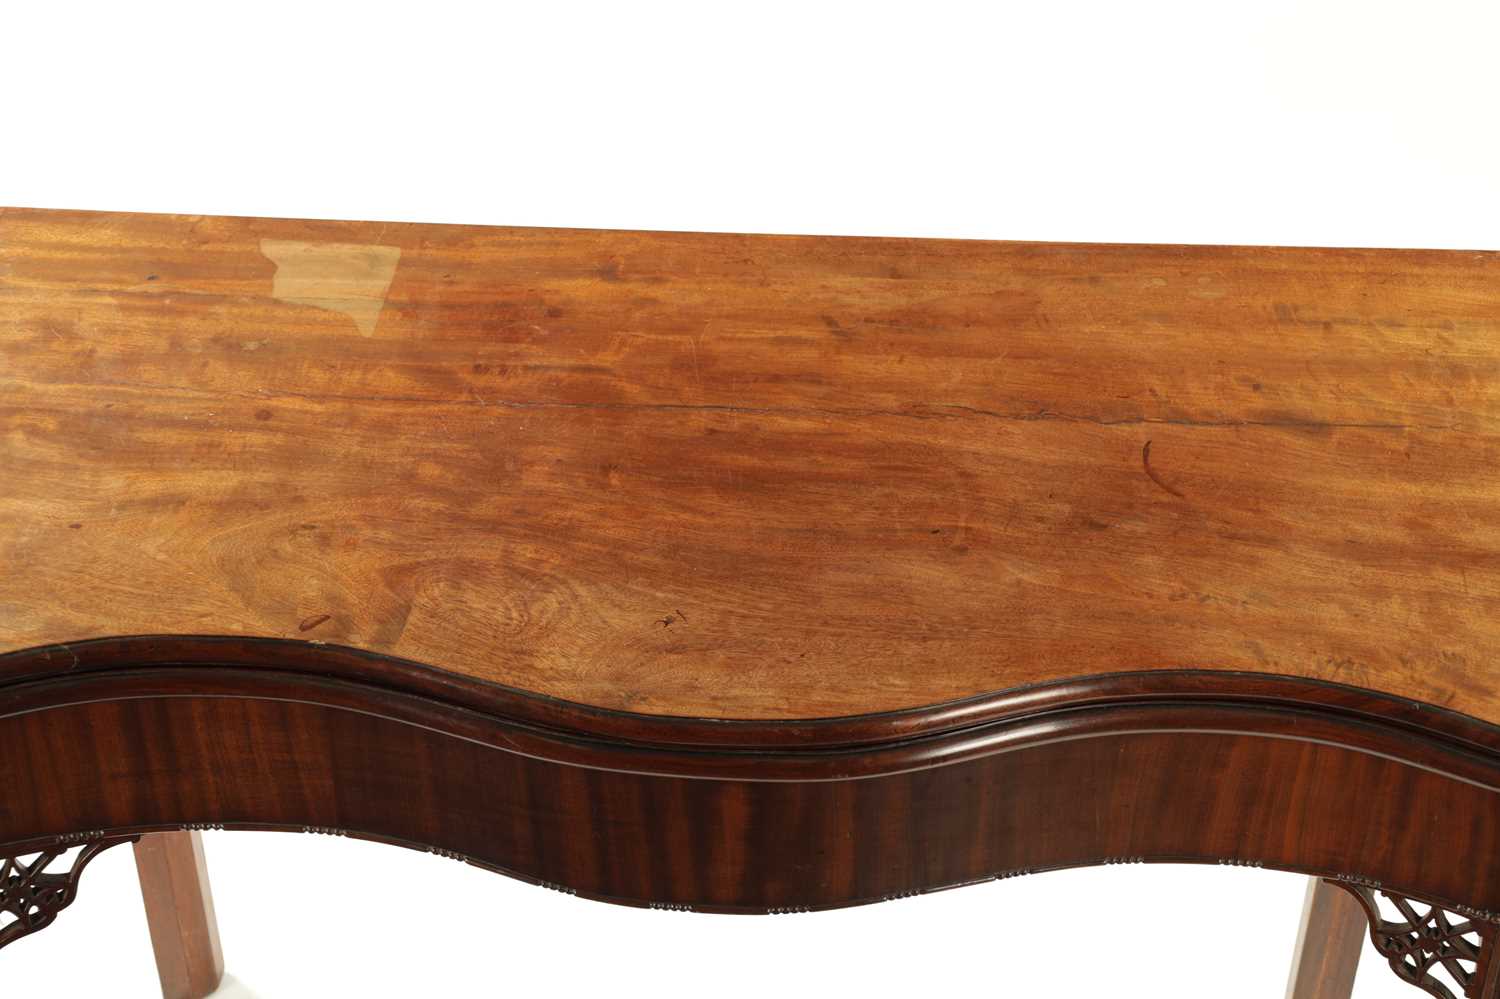 A FINE OVERSIZED GEROGE III SERPENTINE MAHOGANY TEA-TABLE IN THE MANNER OF THOMAS CHIPPENDALE - Image 5 of 8